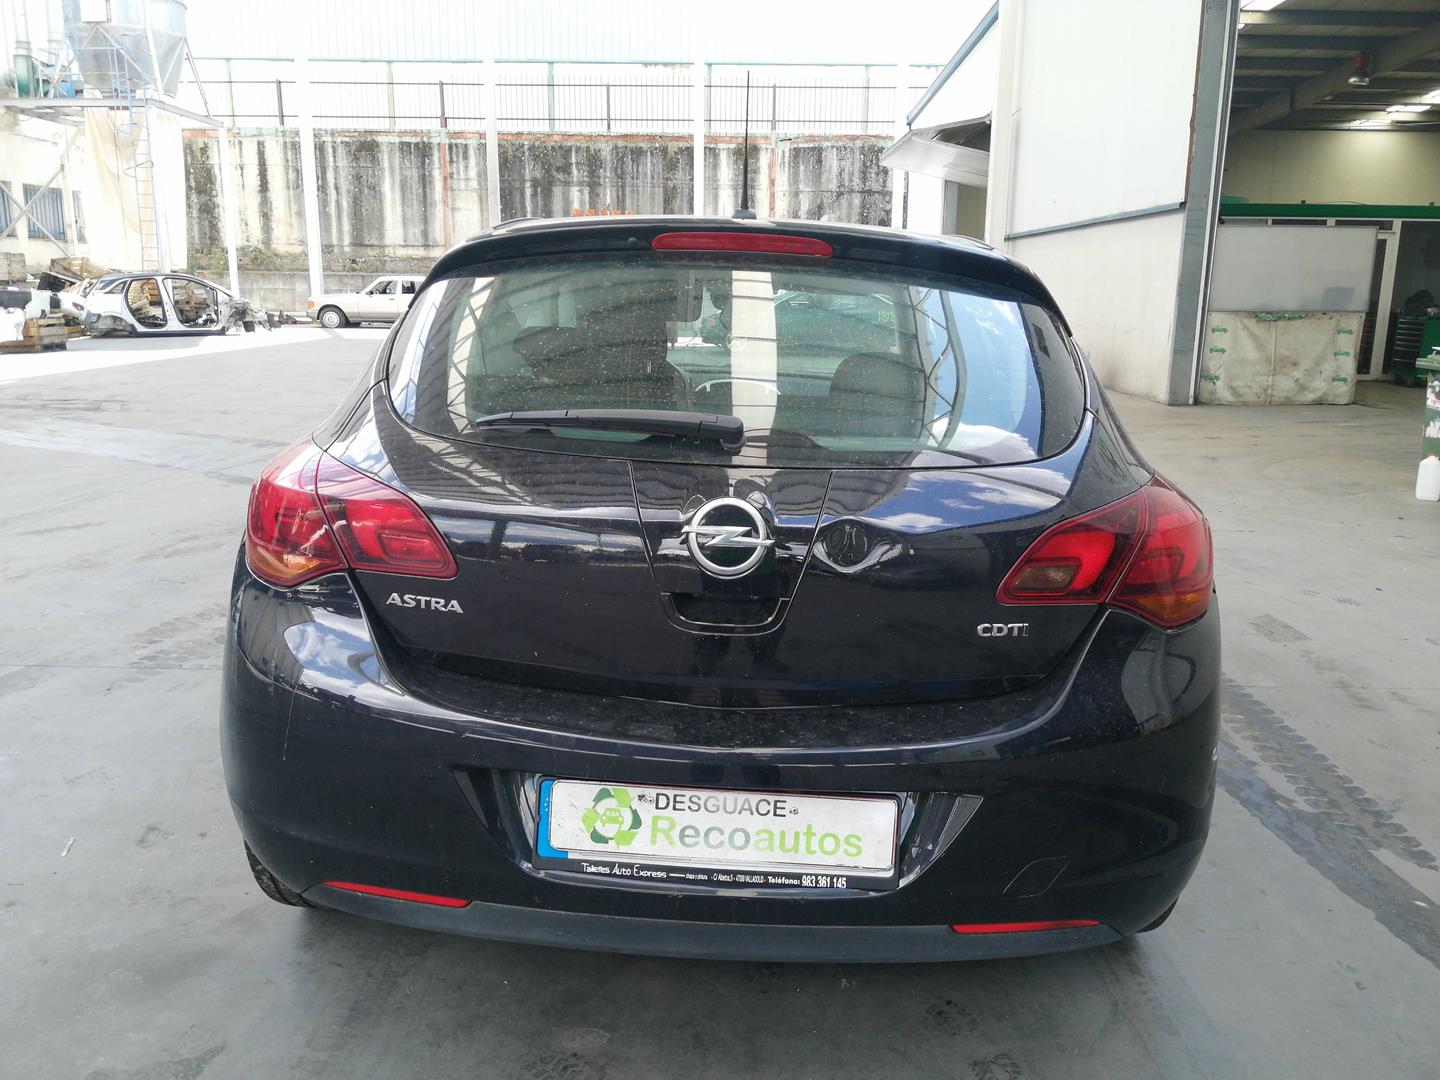 OPEL Astra J (2009-2020) Other Interior Parts 13267984, 13267984 24147581